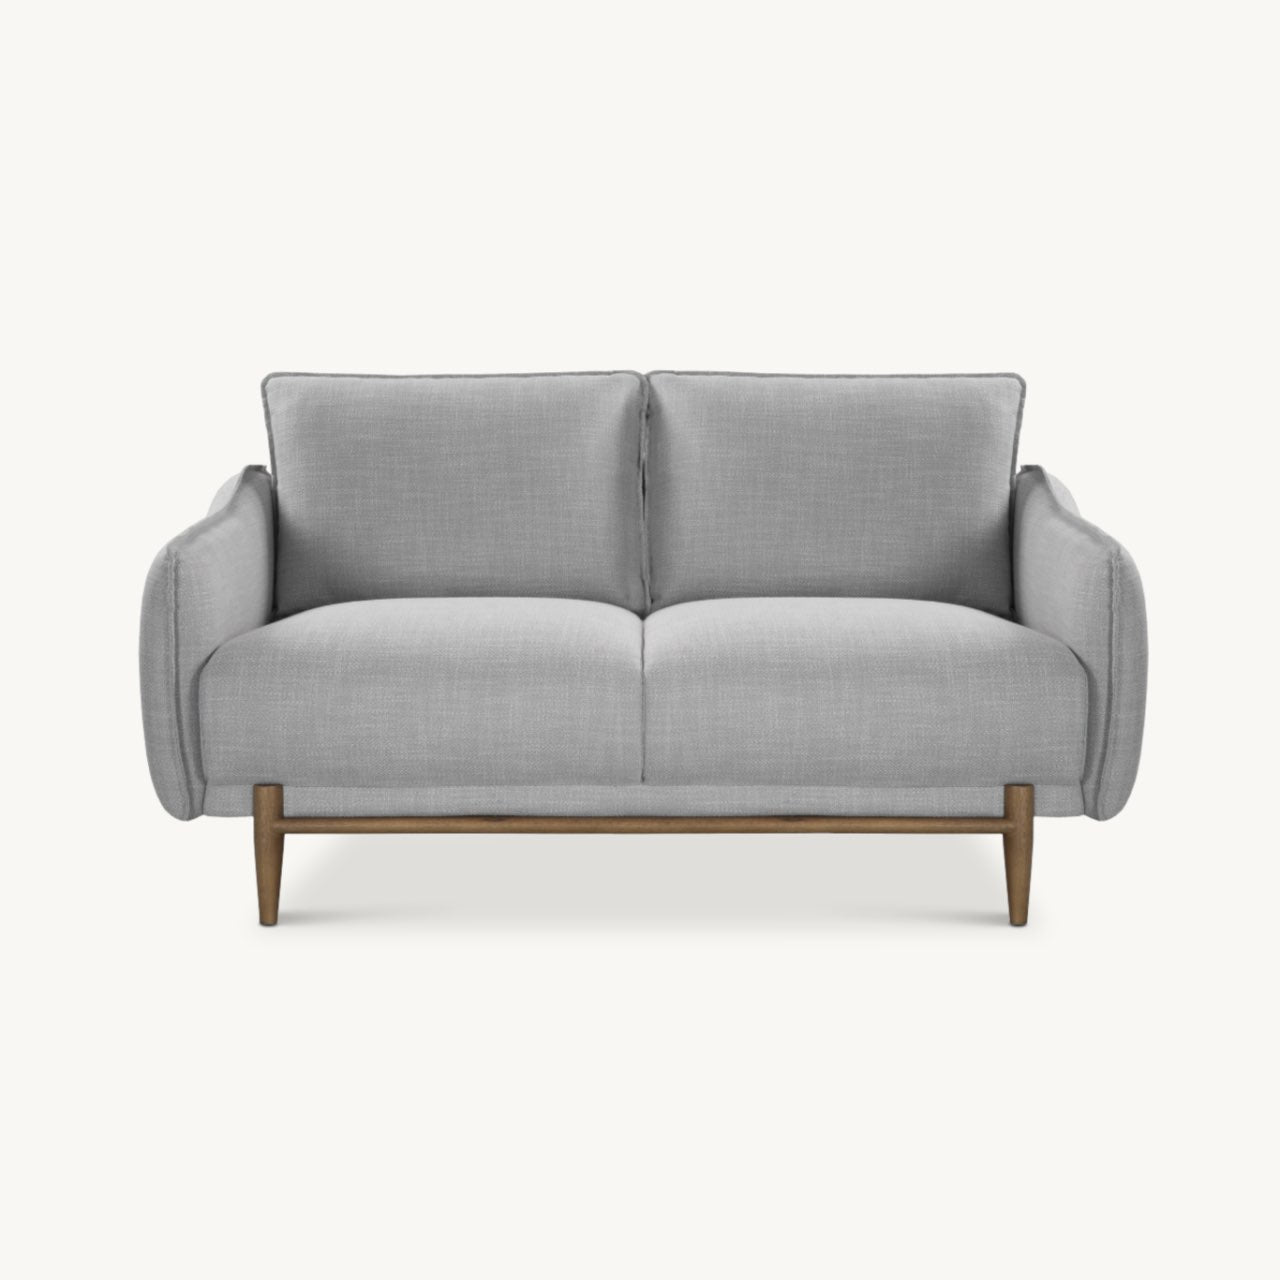 Simple, modern 2 seater sofa upholstered in grey linen fabric